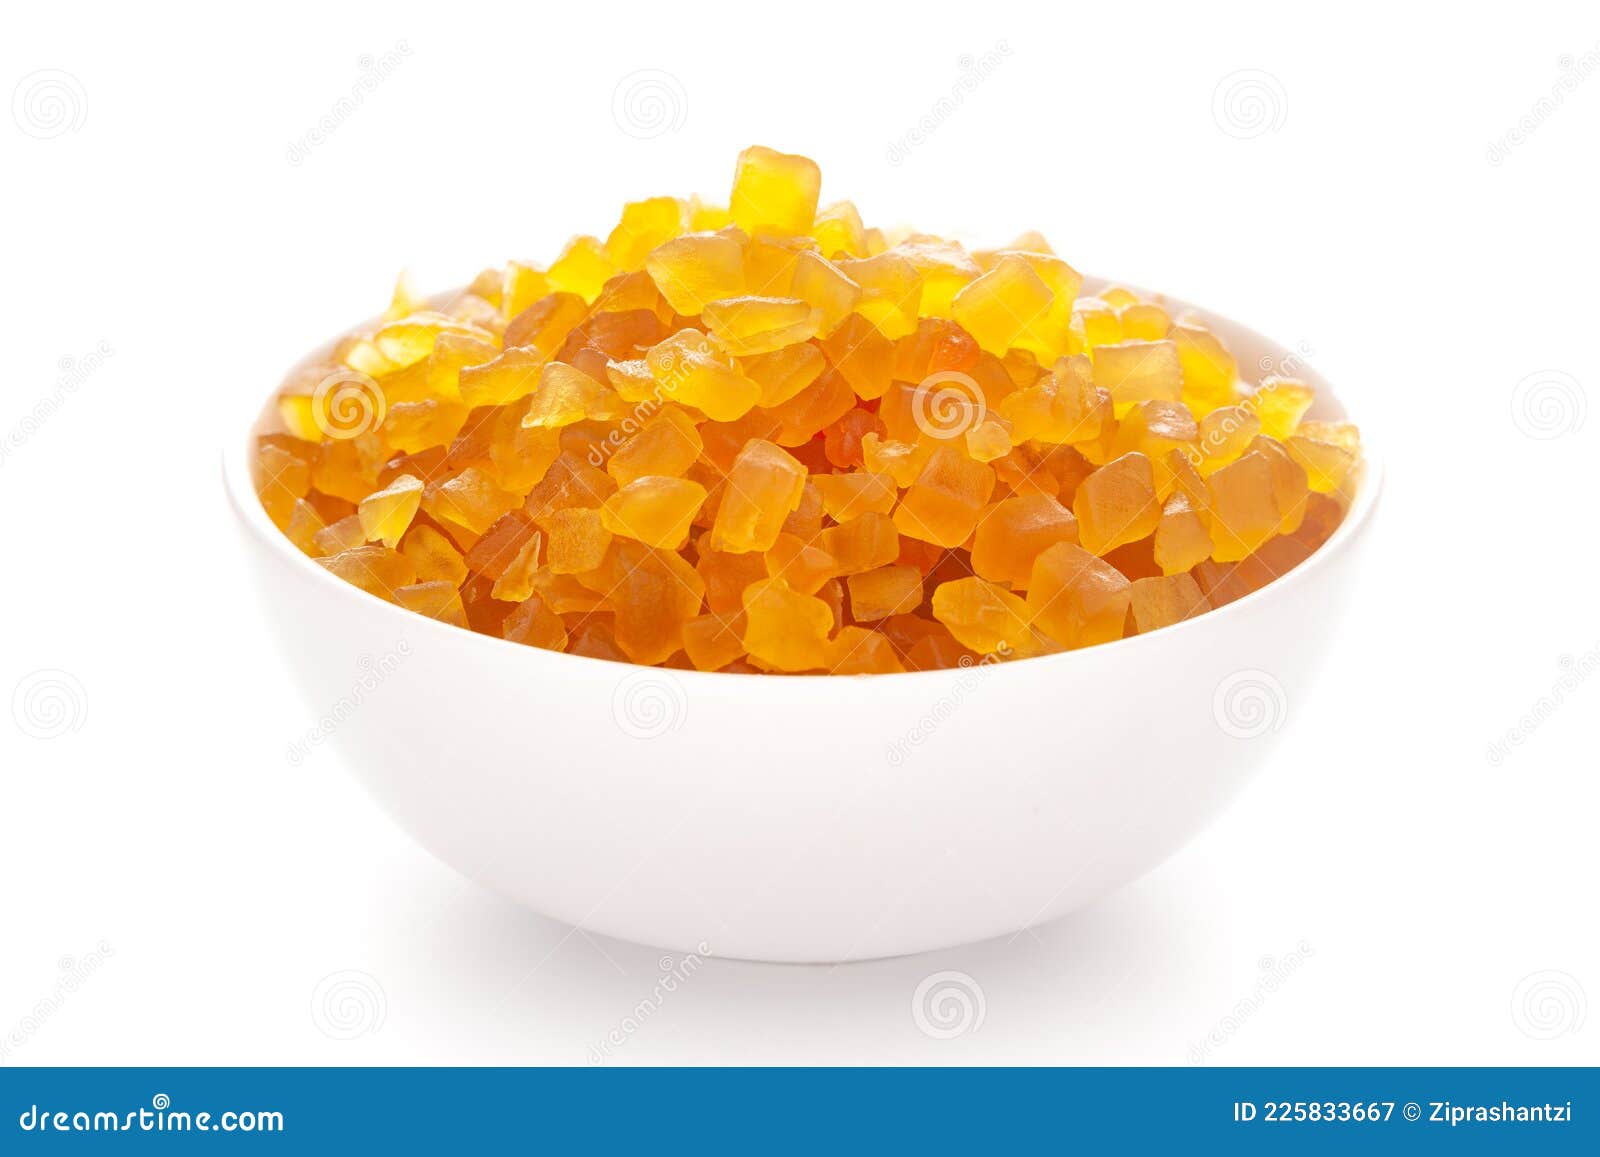 close-up organic yellow tutti frutti sweet soft candy  in white ceramic  bowl on white background